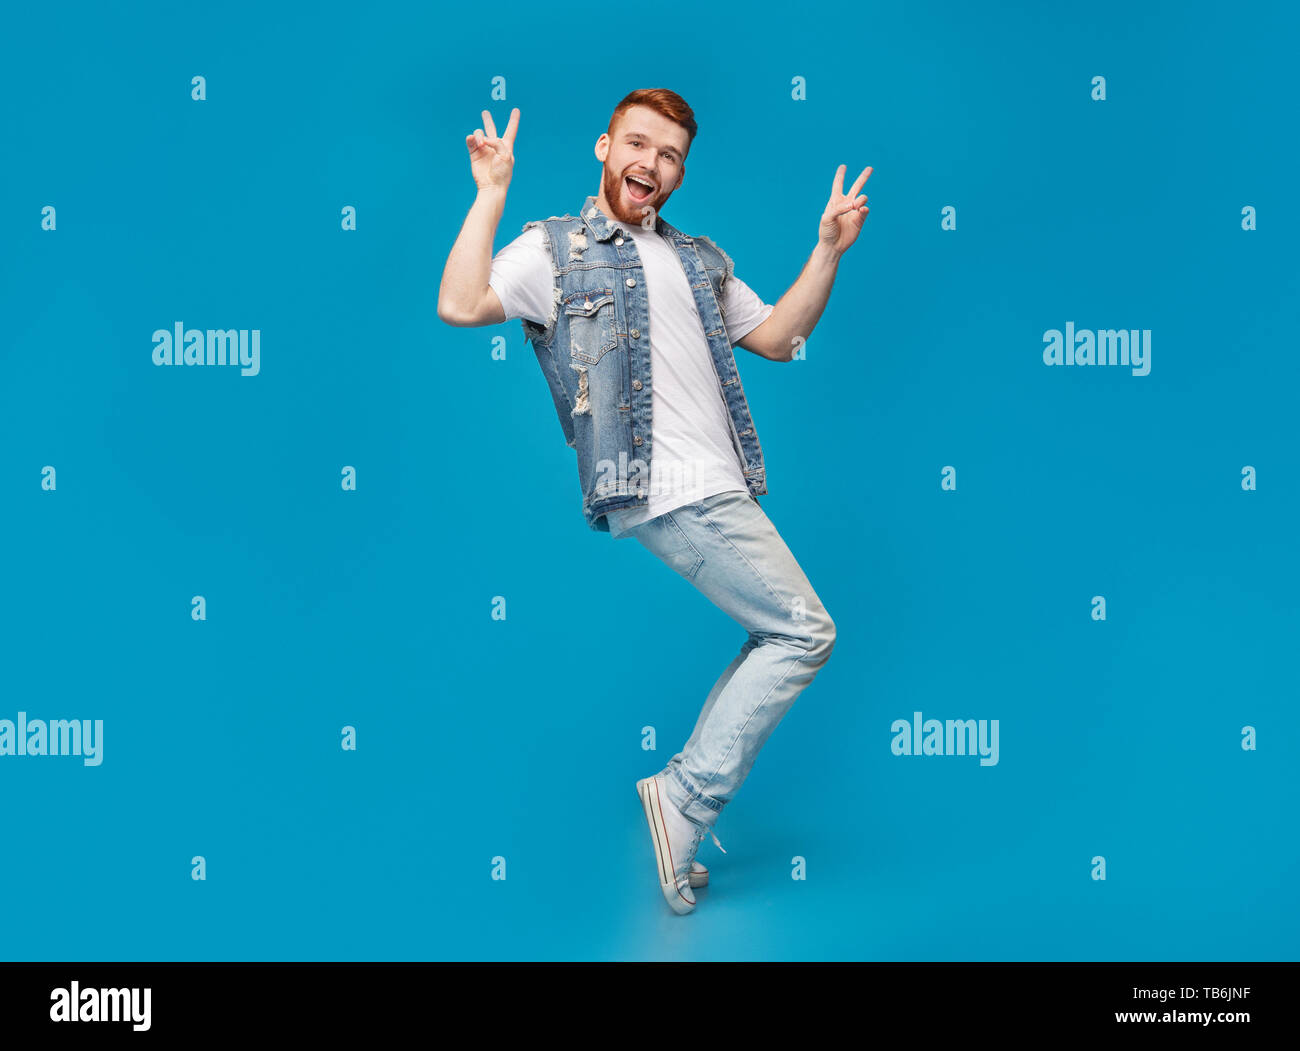 Awesome guy showing peace gesture and standing on tiptoes on blue background, copy space Stock Photo